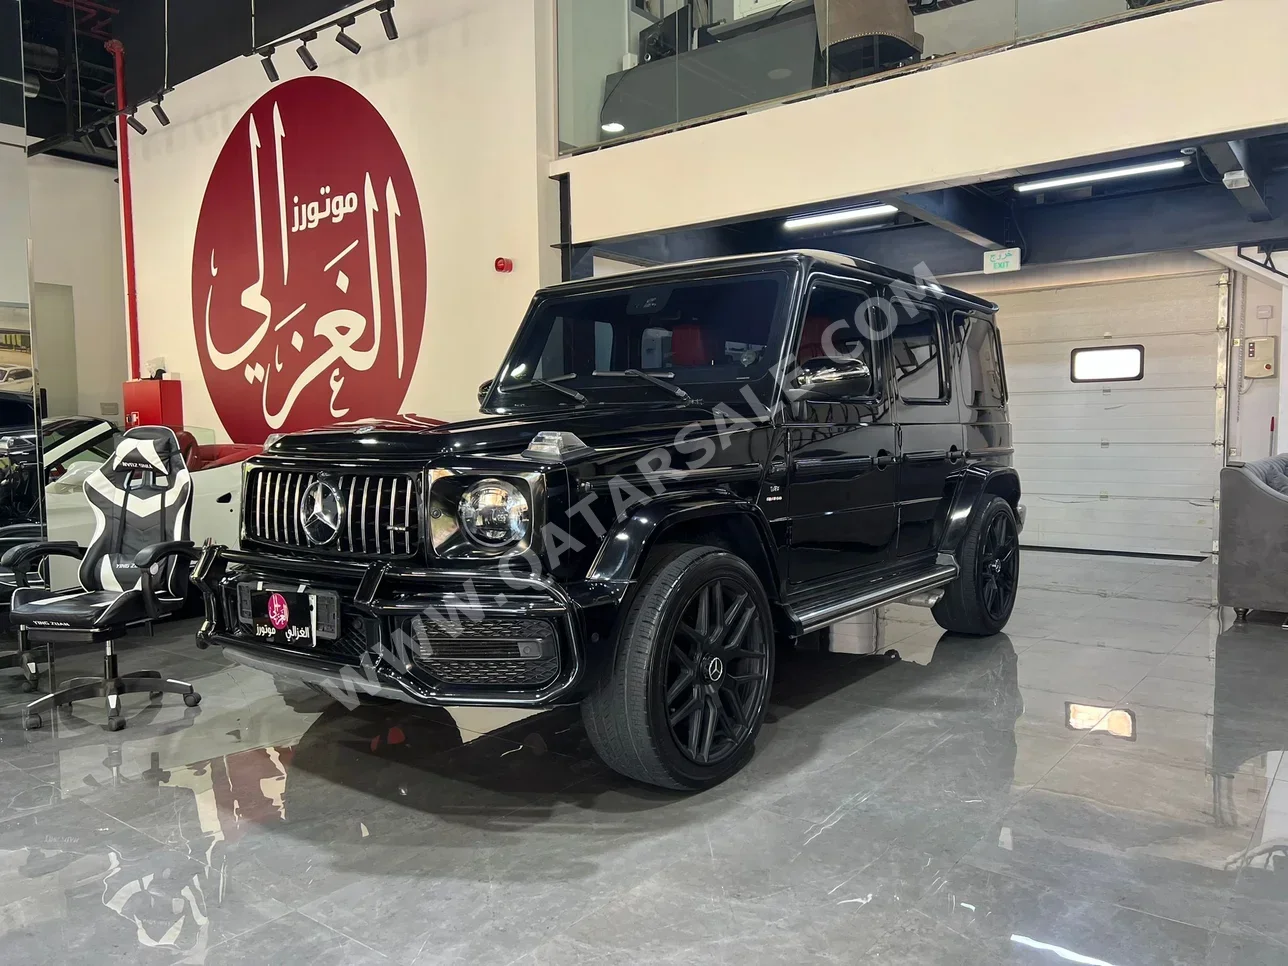 Mercedes-Benz  G-Class  500  2008  Automatic  200,000 Km  8 Cylinder  Four Wheel Drive (4WD)  SUV  Black